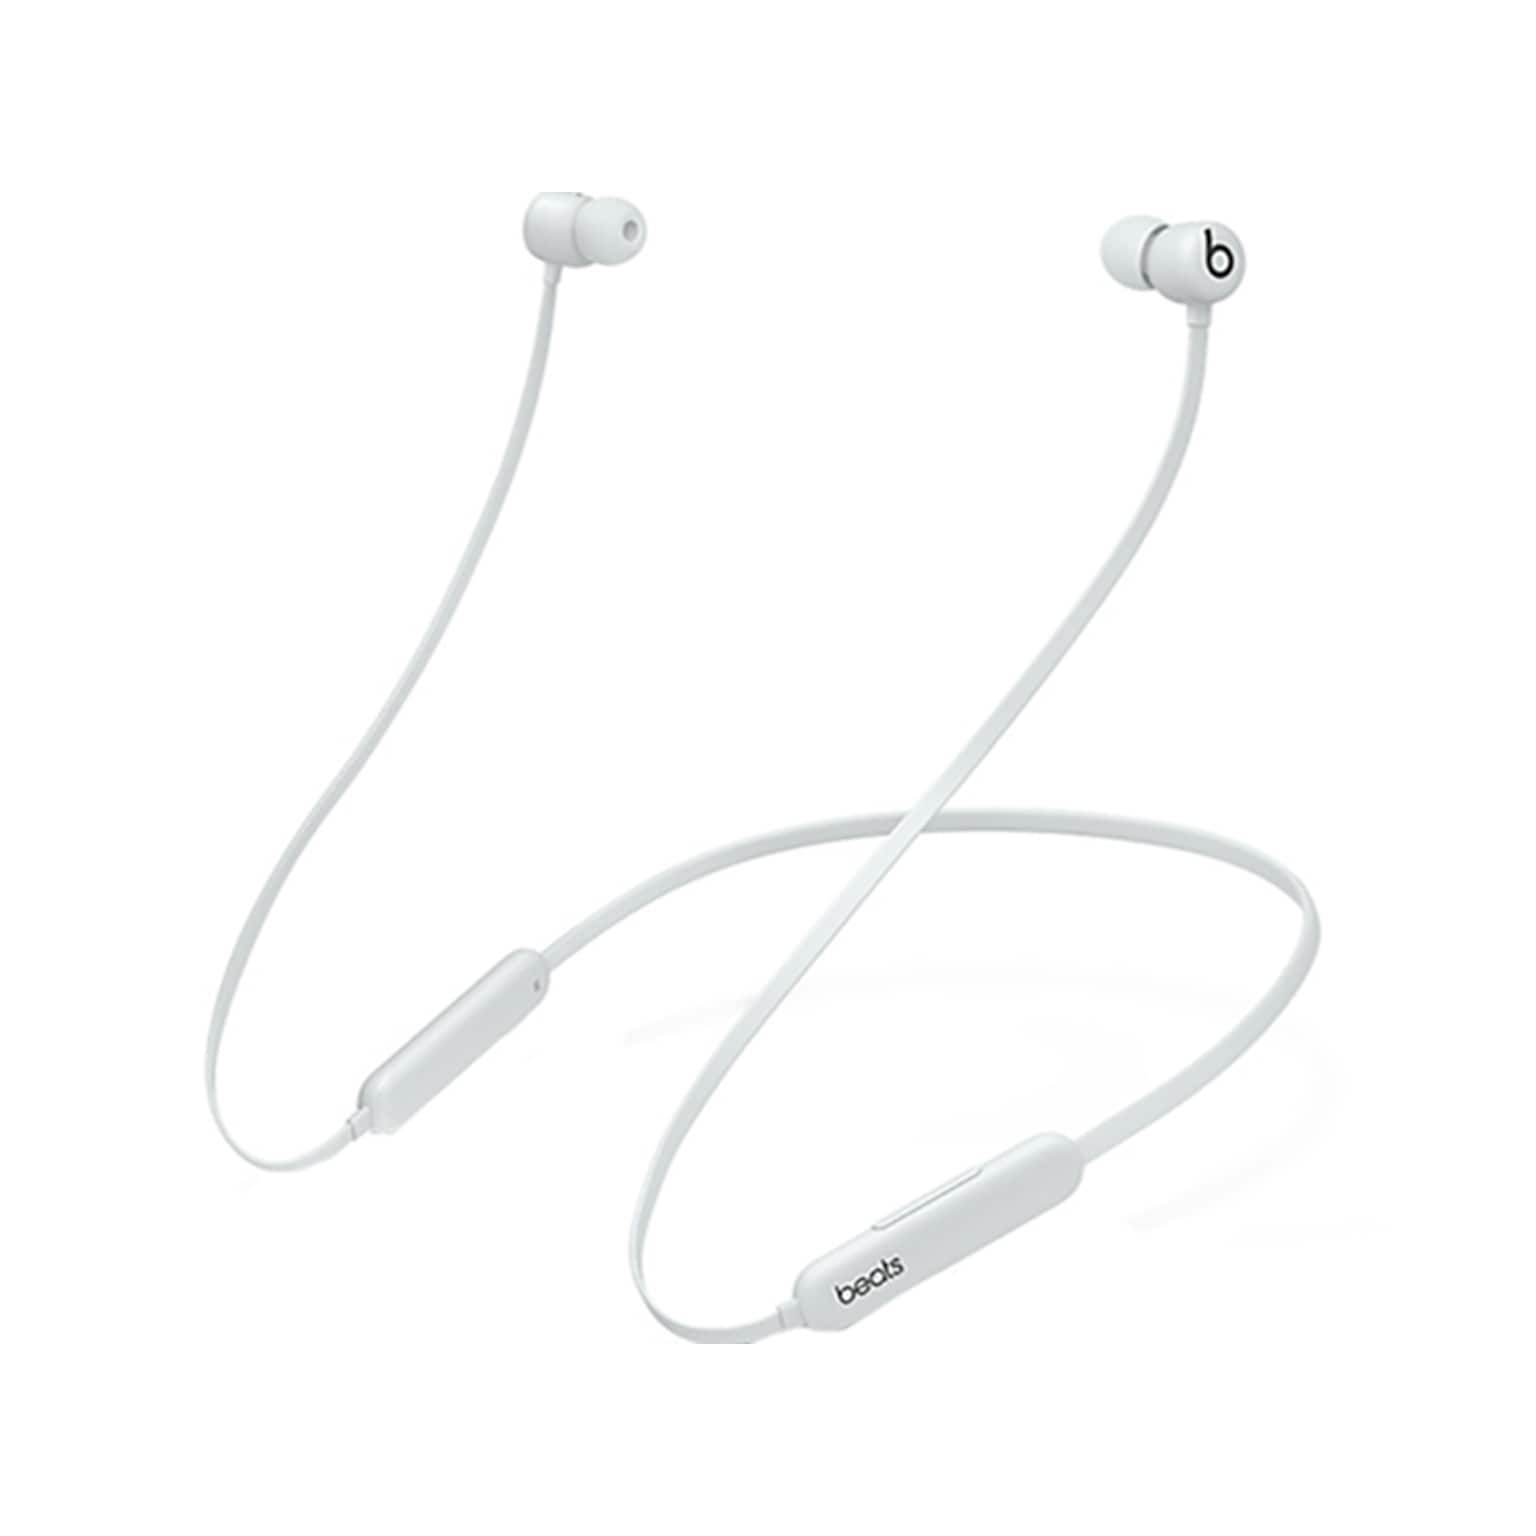 Beats Flex Noise Canceling Bluetooth Earbuds Accessory, Smoke Gray (MYME2LL/A)